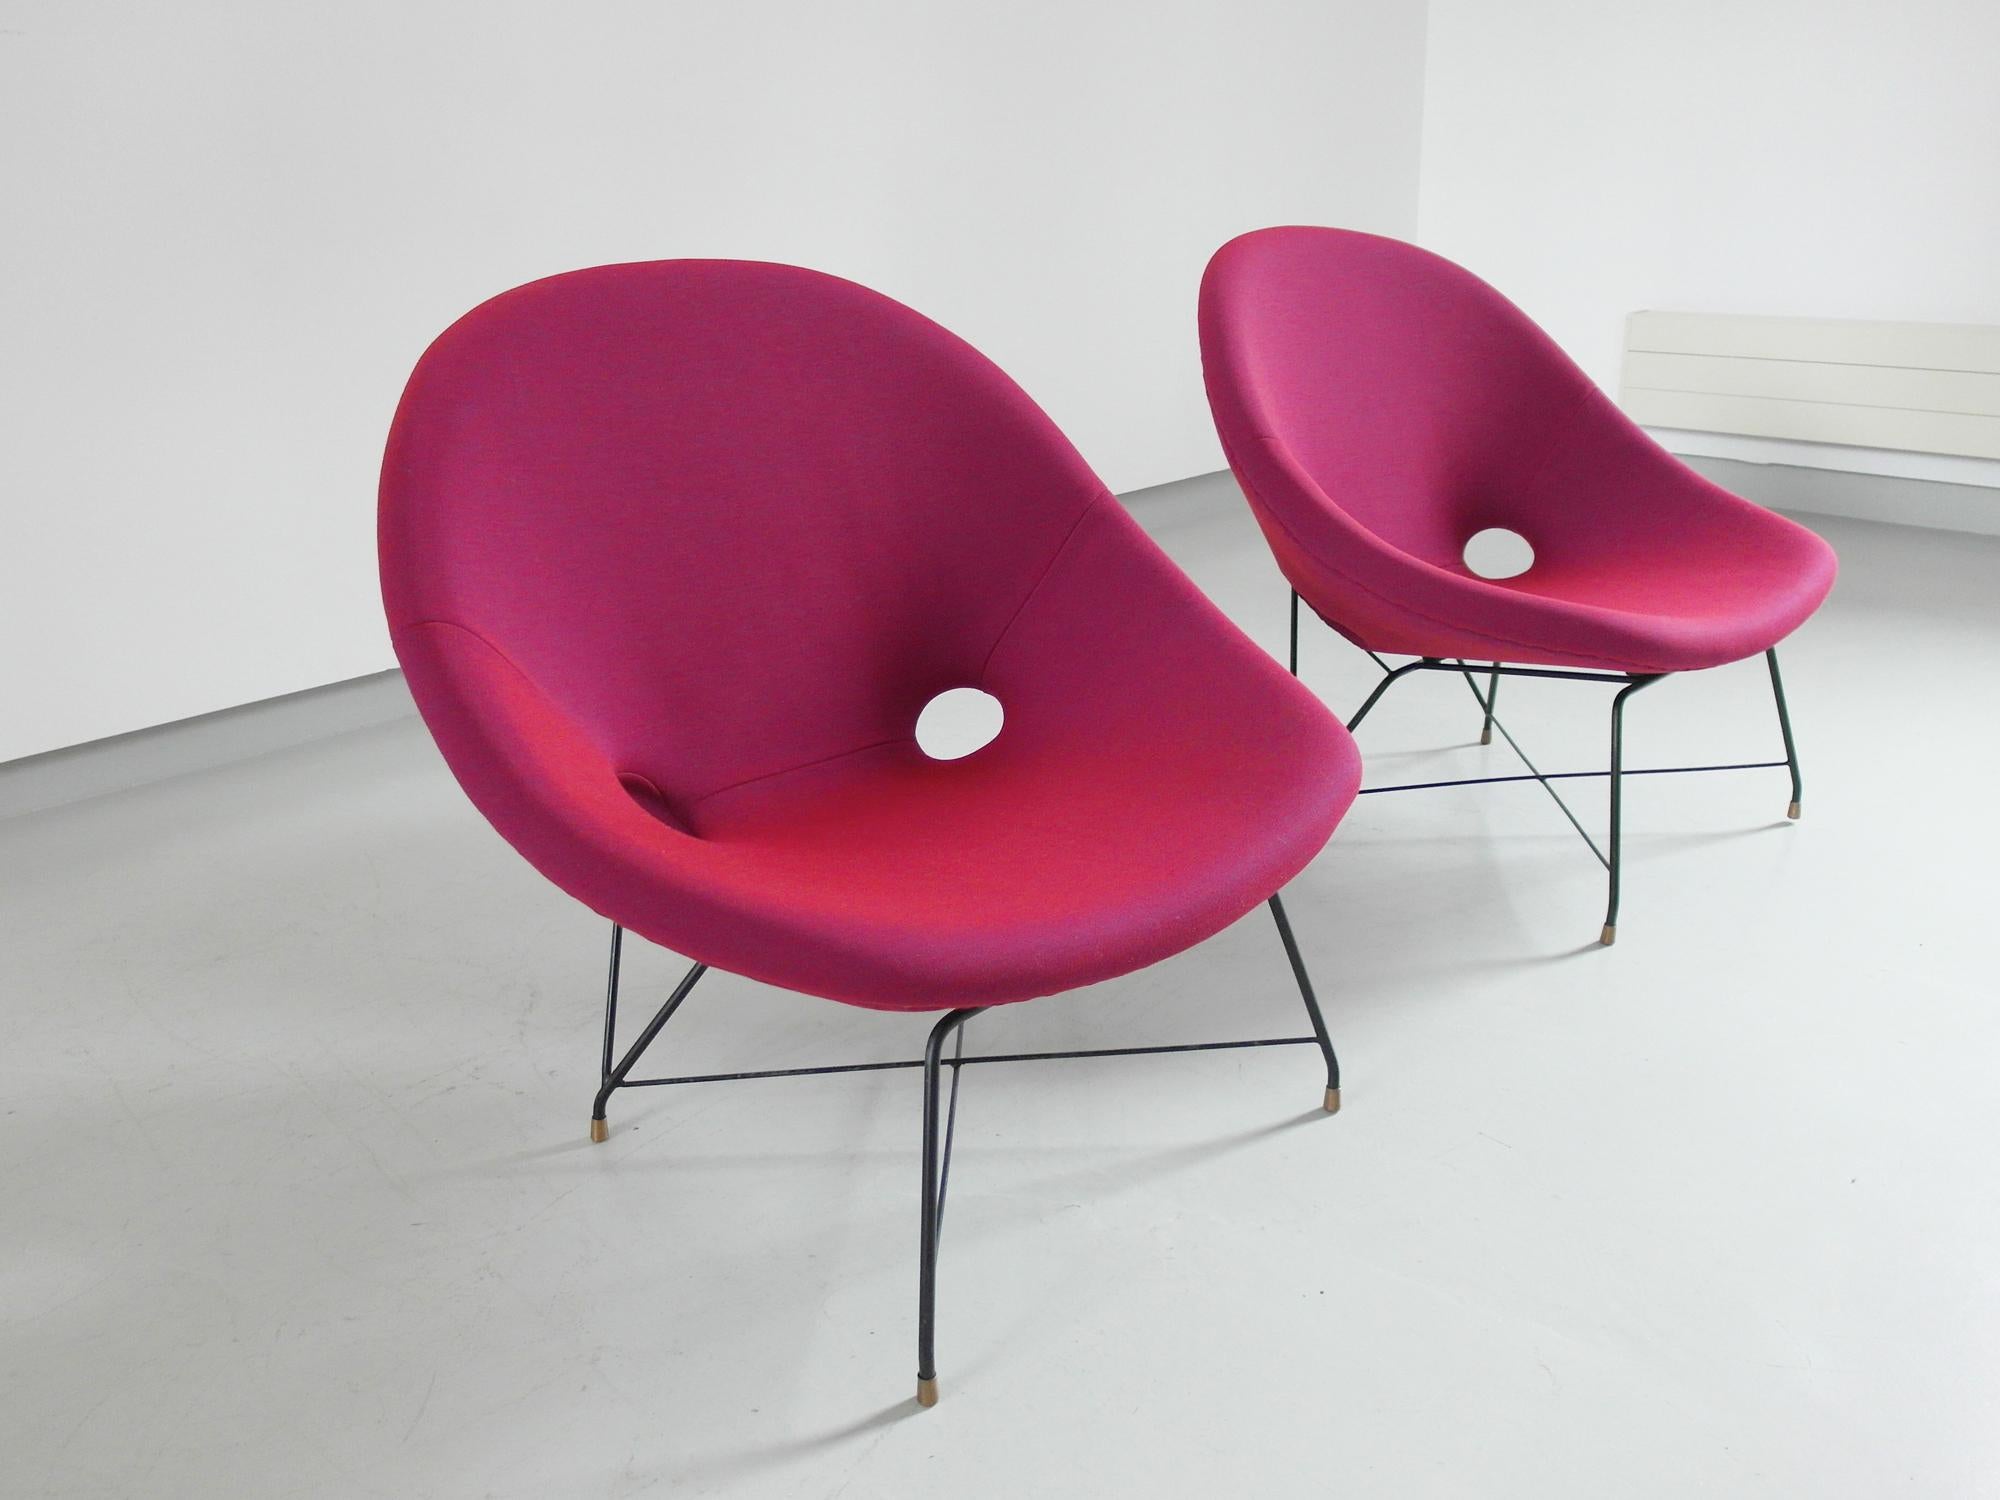 Pair of Cosmos Chairs in Ruby red/ Raspberry red by Augusto Bozzi for Saporiti For Sale 7